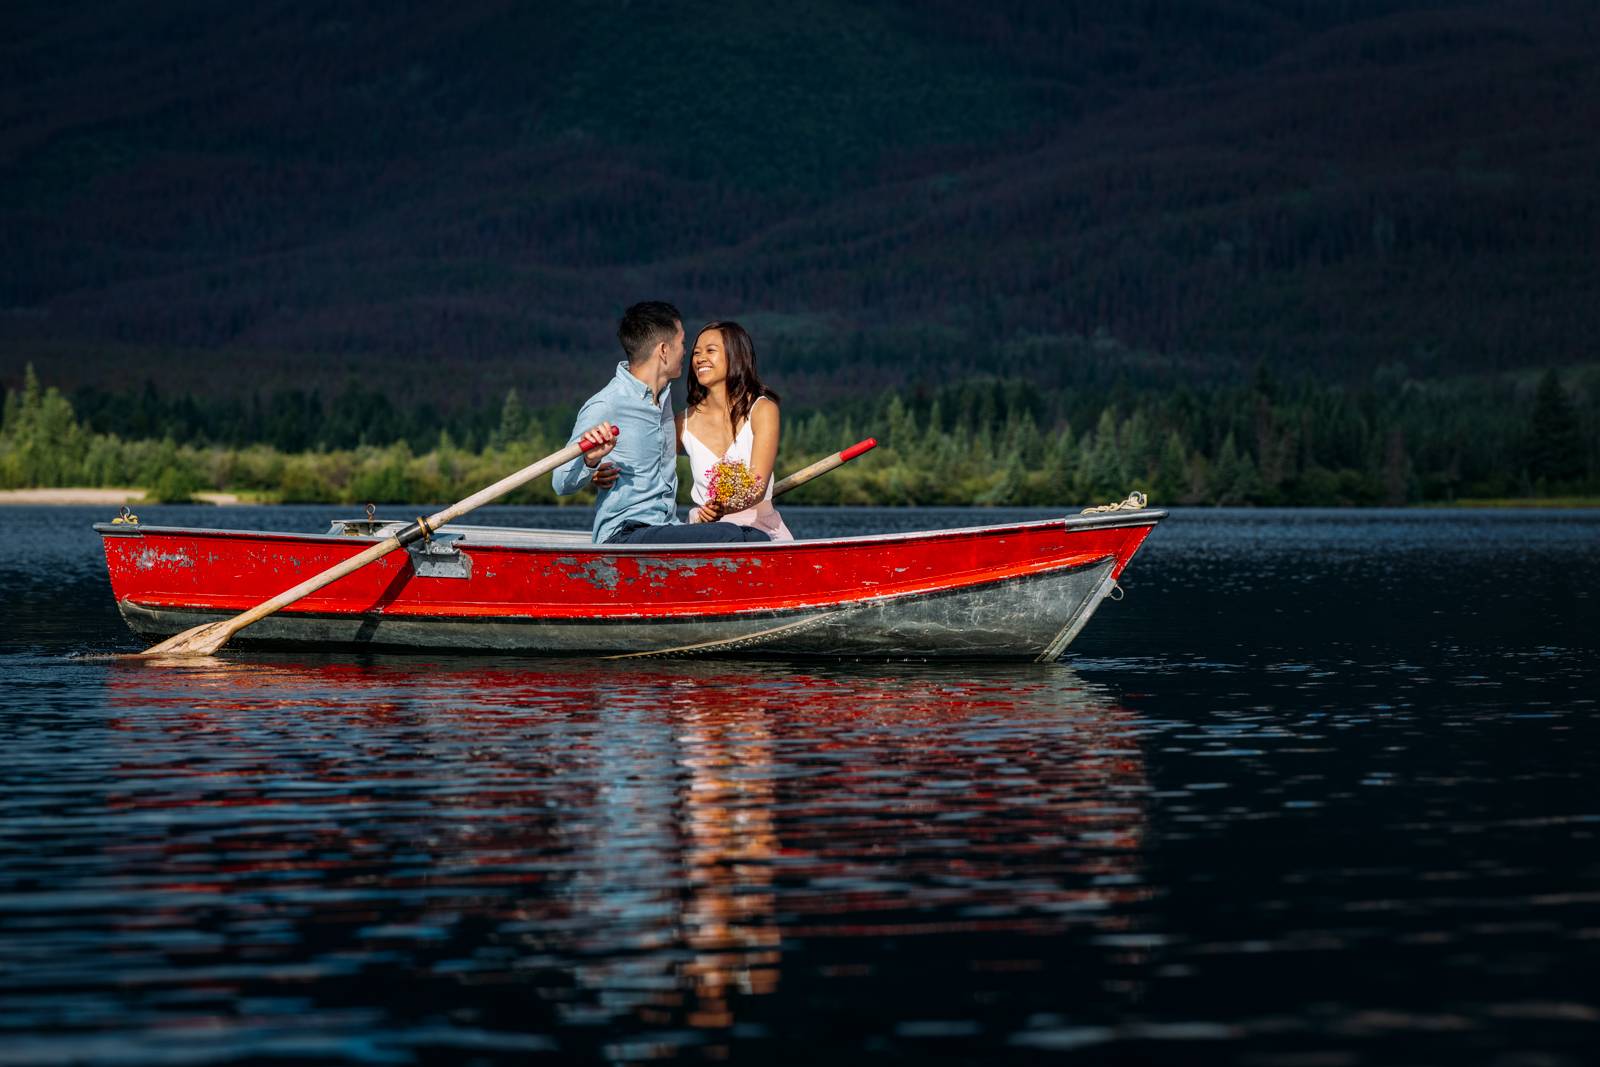 engaged-on-the-red-boat